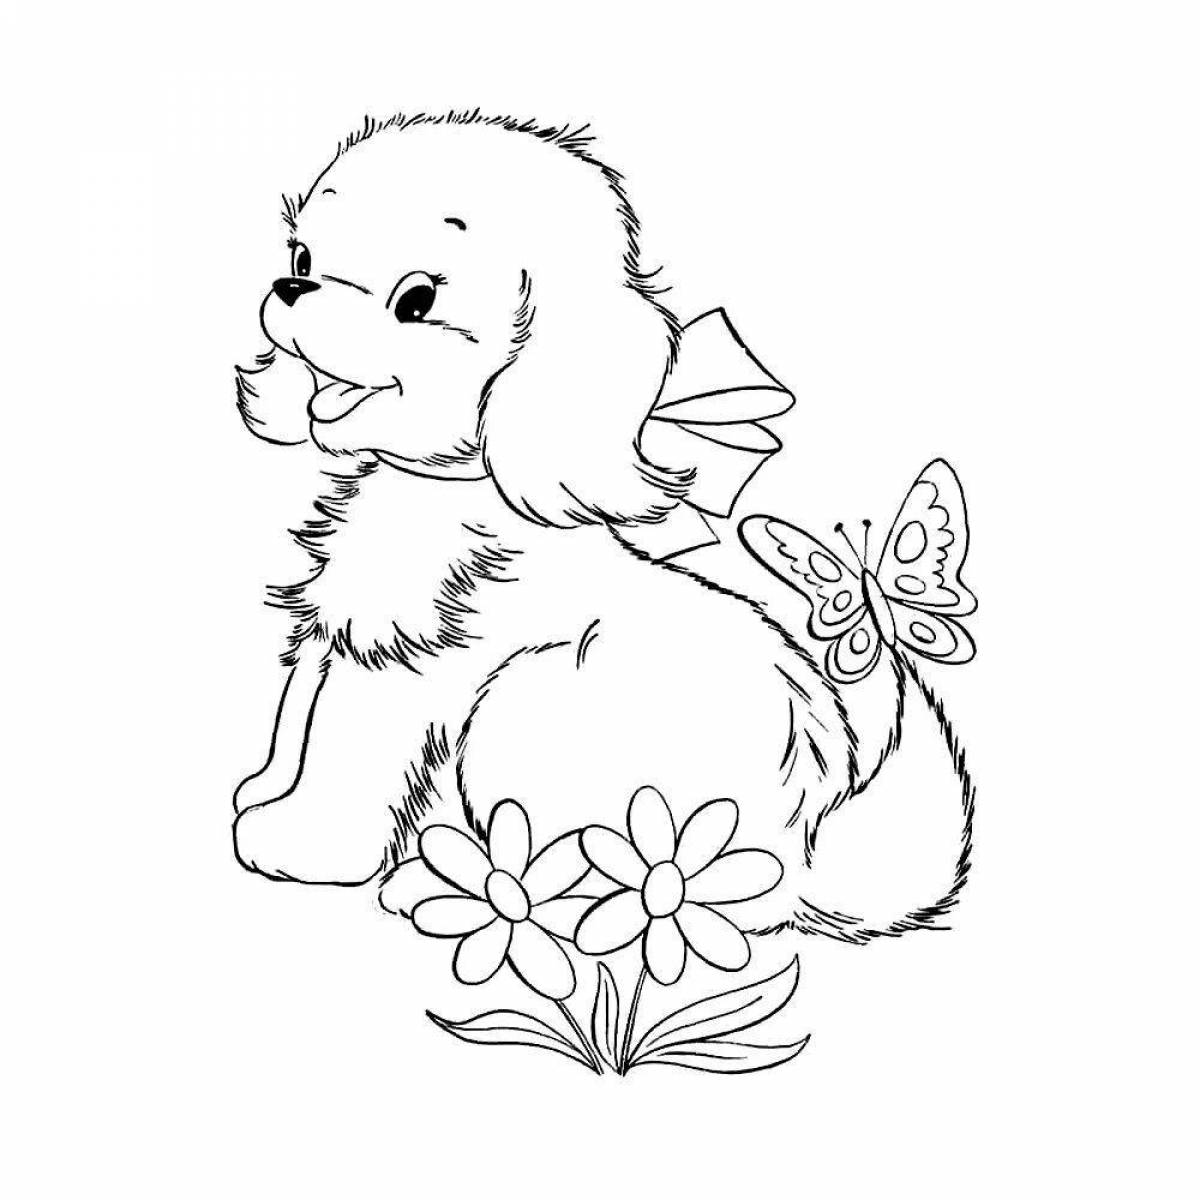 Refreshing dog coloring page for 5-6 year olds